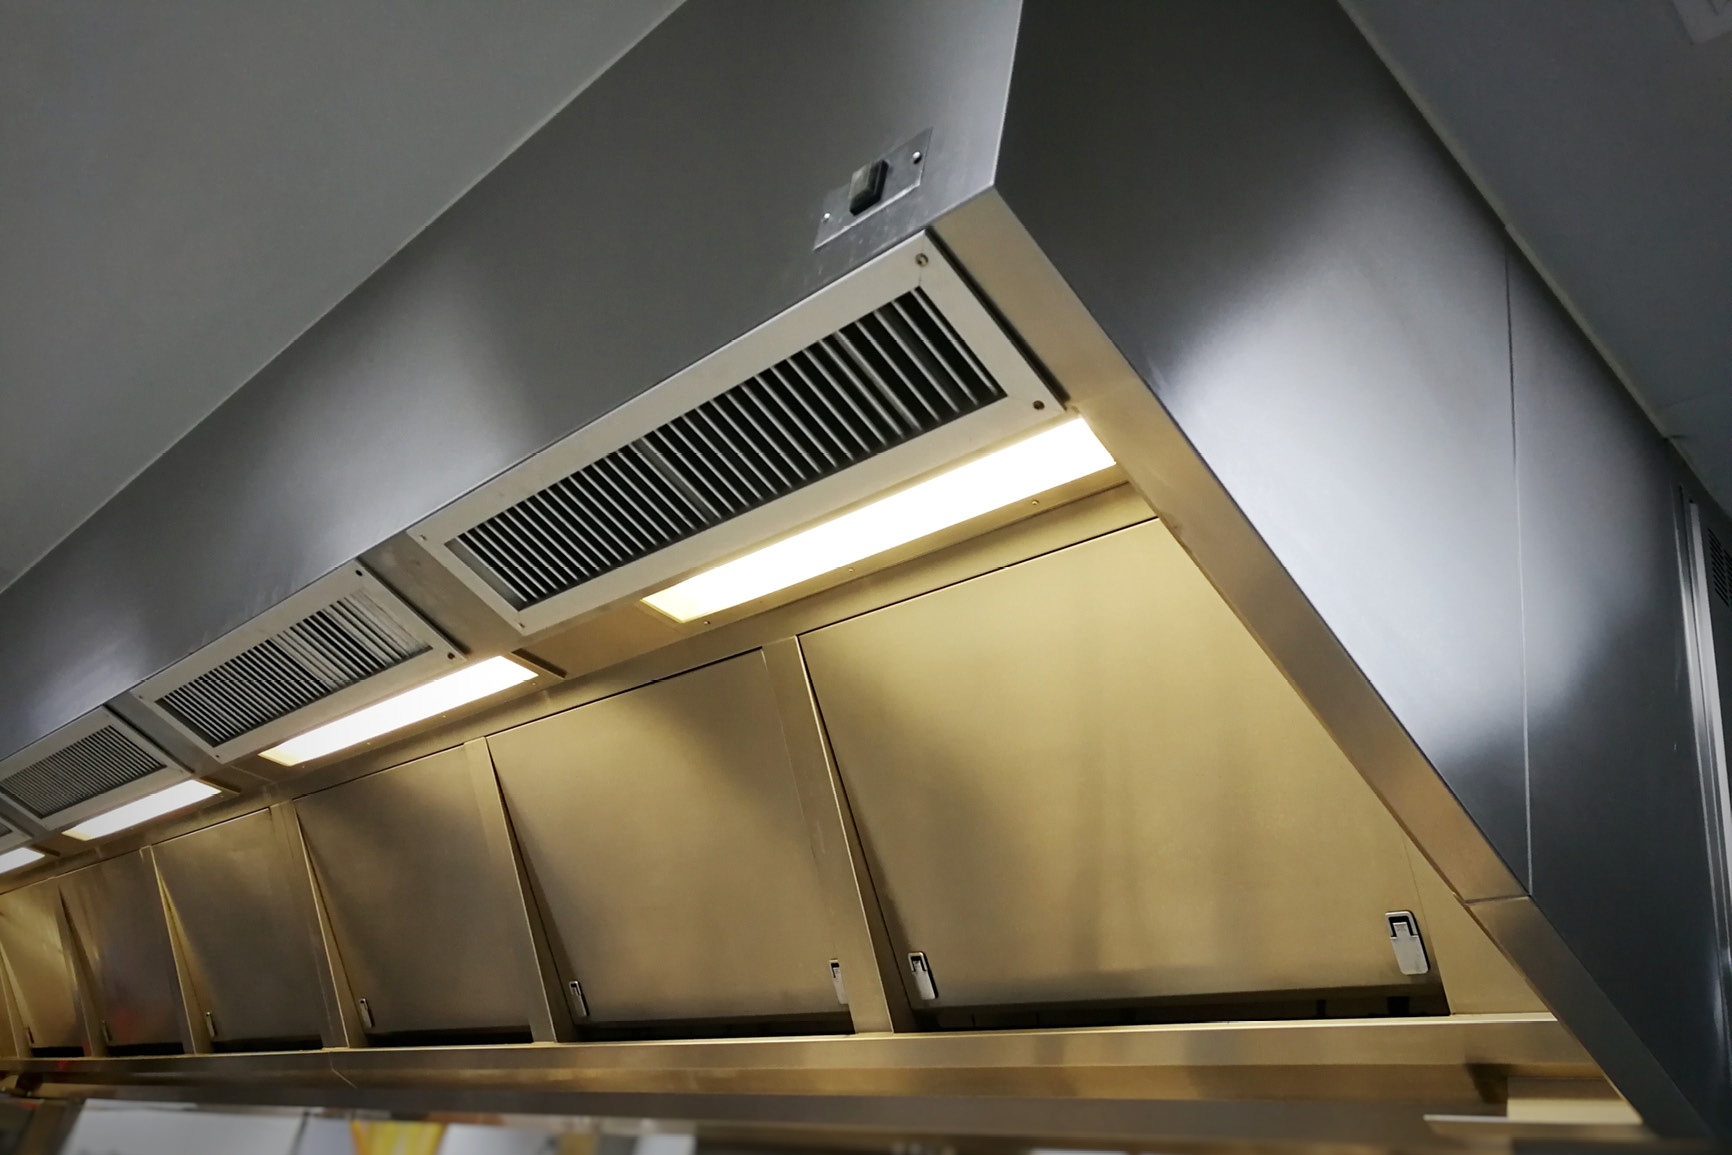 Tecs - Comprehensive building compliance services - Kitchen Extract & Ductwork Cleaning